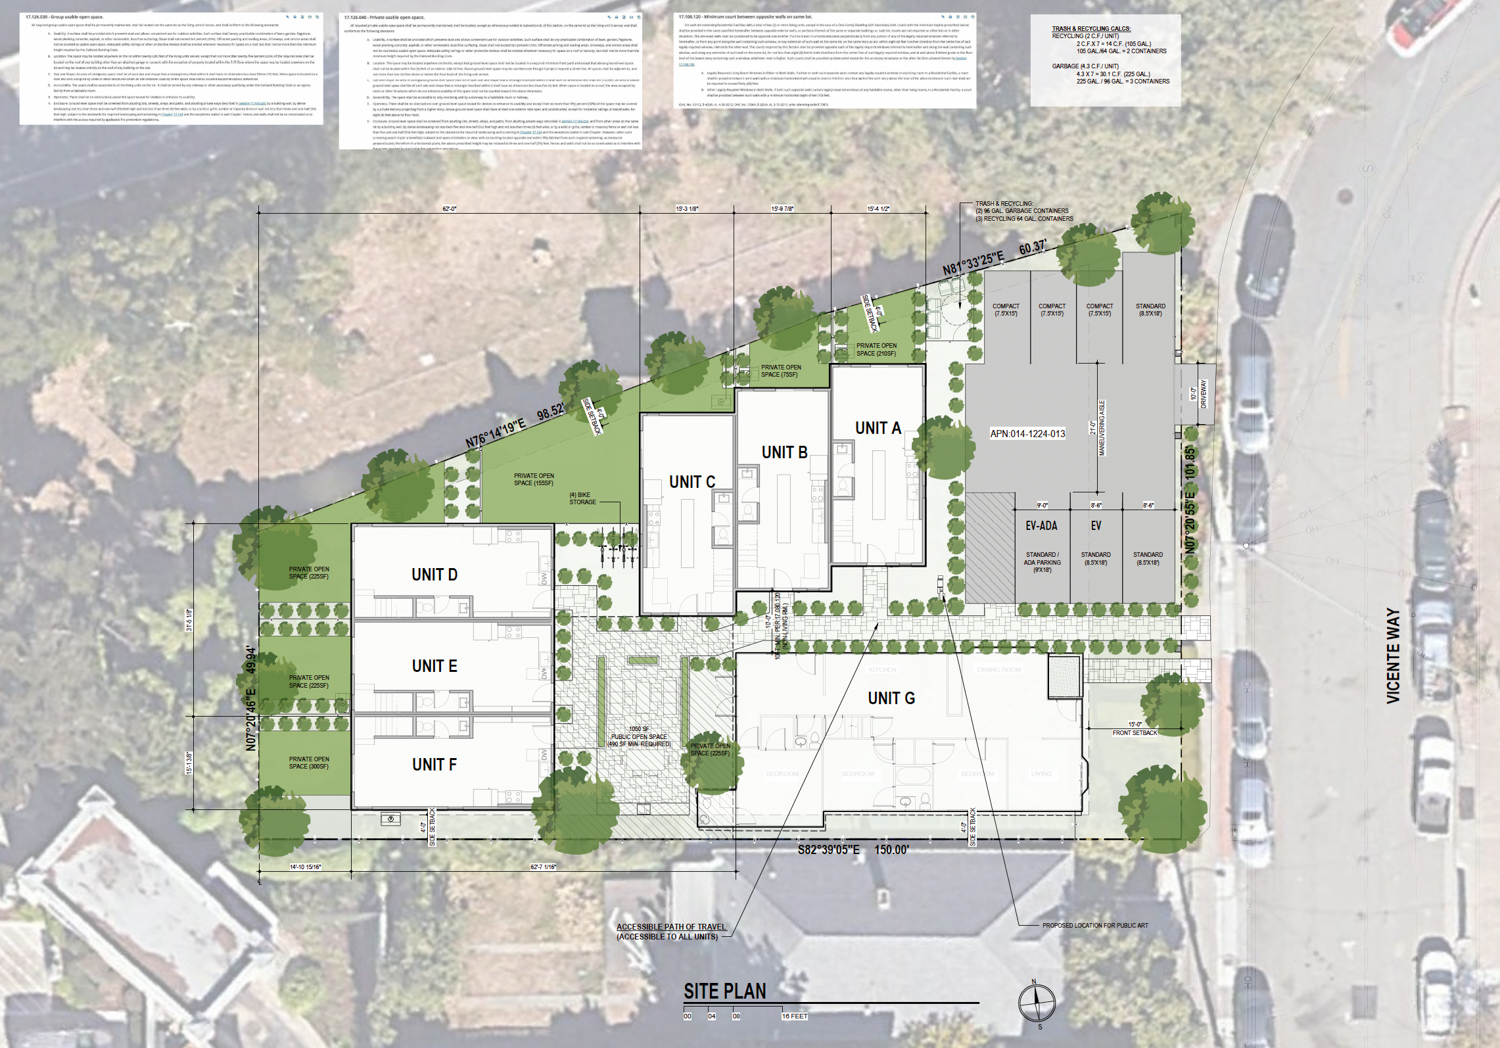 5527 Vicente Way site map, illustration by Left Coast Architecture